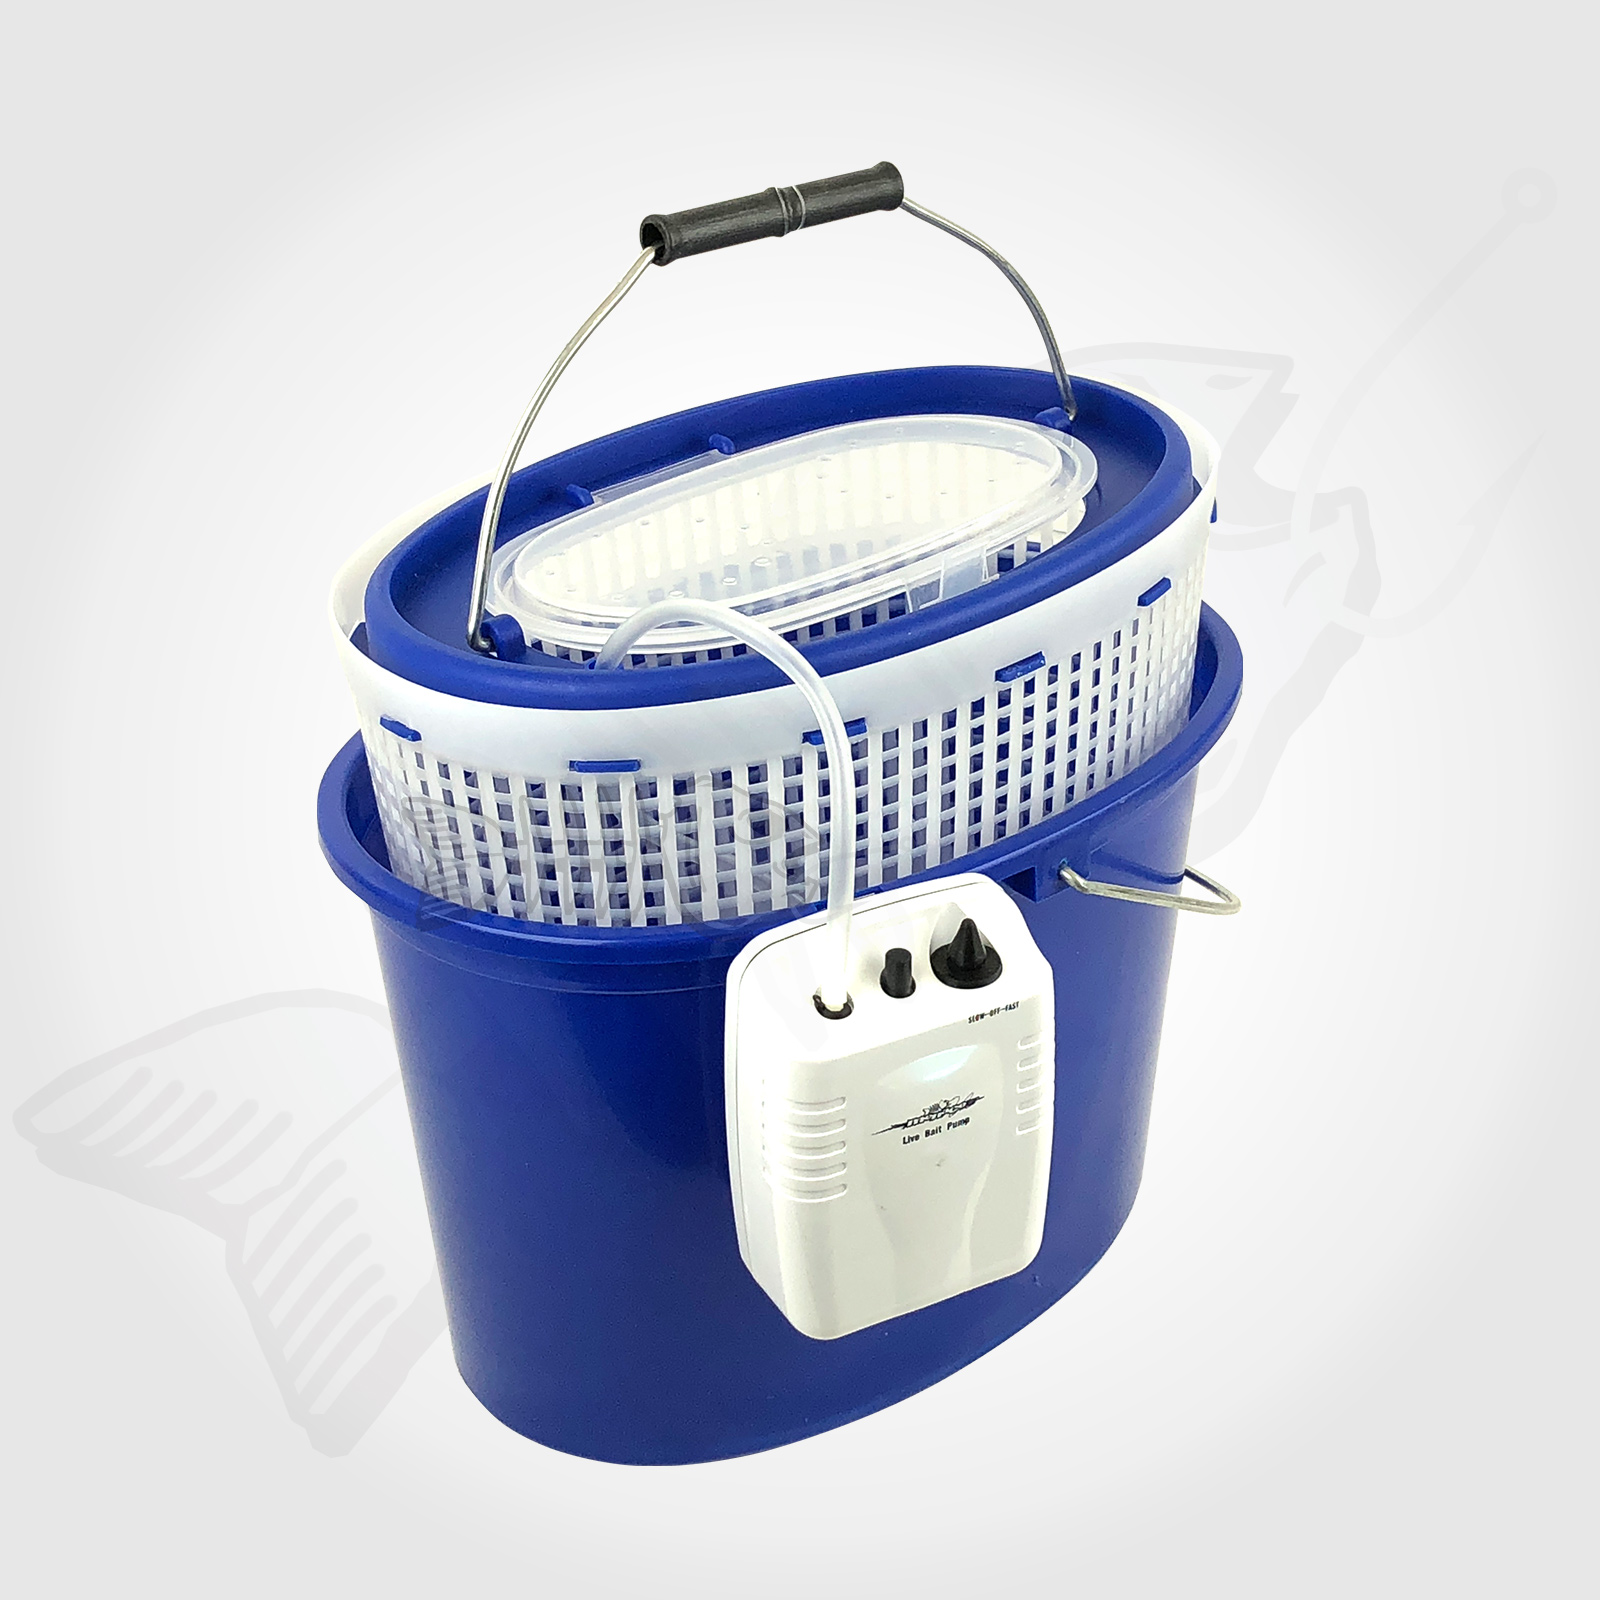 5L 3in1 LIVE BAIT BUCKET & Free Aerator Pump - 120+ hrs run time